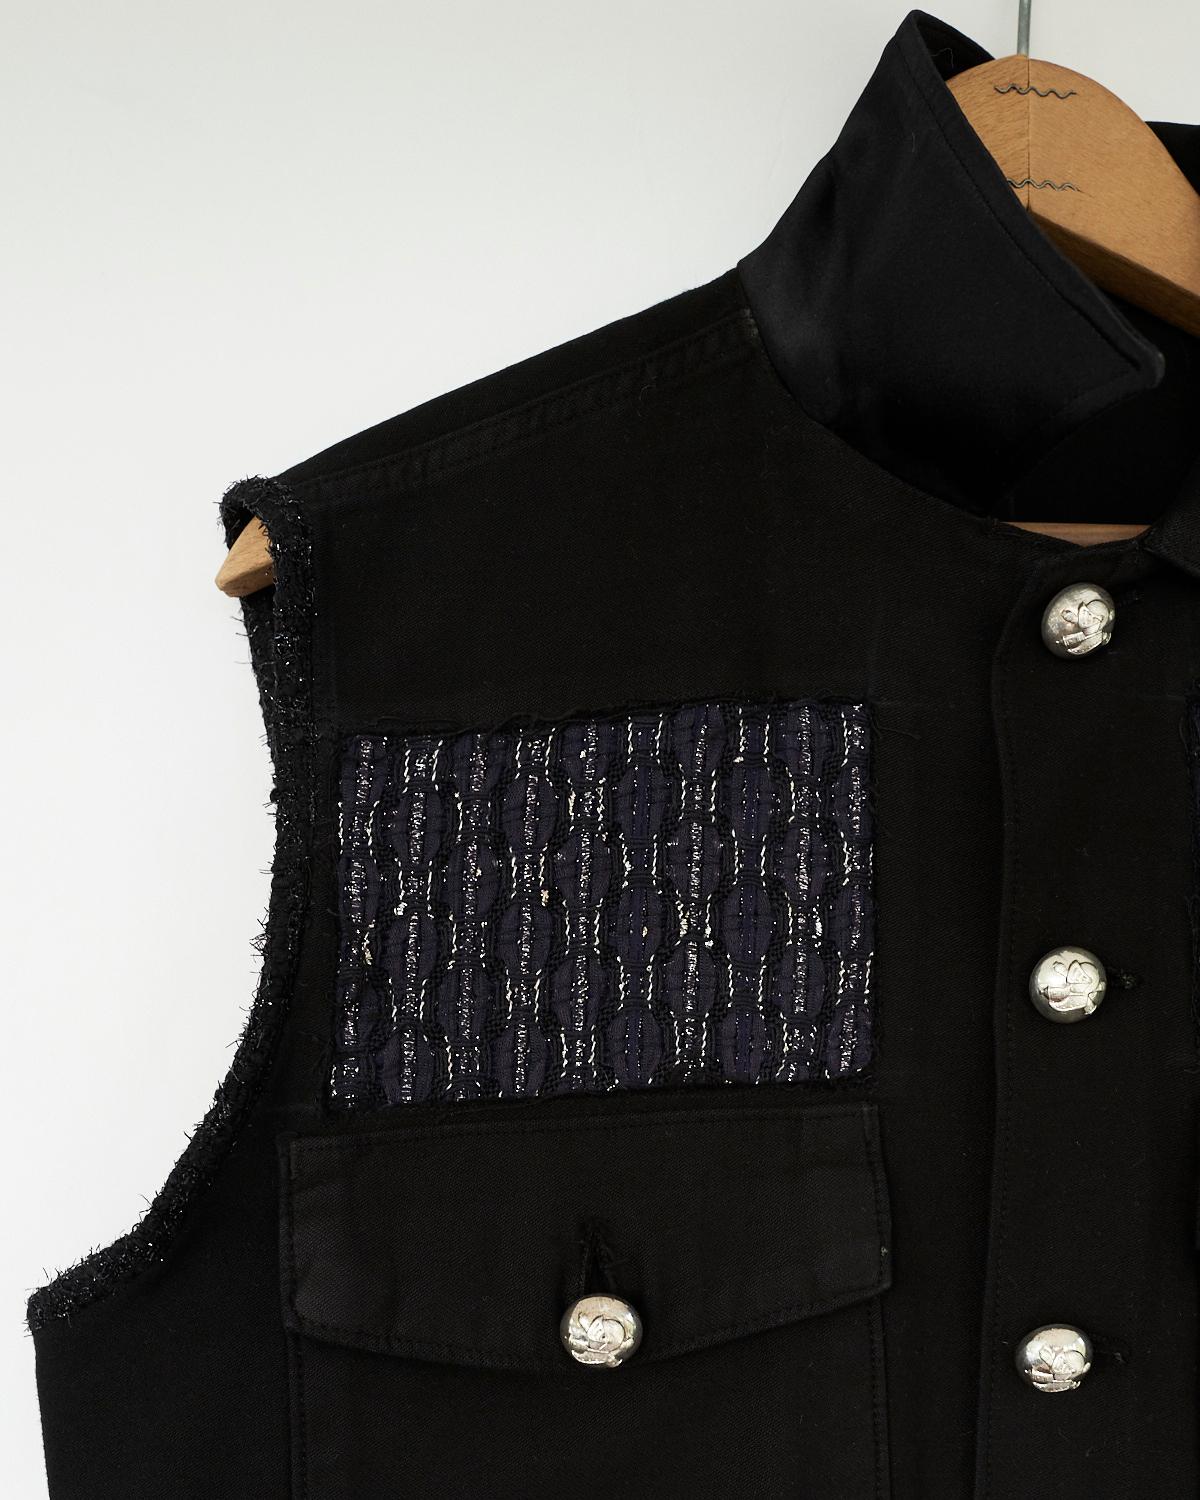 Embellished Sleeveless Jacket Black Military Blue Tweed Silver Buttons J Dauphin
Upcycled Vintage, Sustainable Luxury

Our Up-cycled Vintage Jackets are made from vintage, natural fibers, military clothing and french workwear from the period